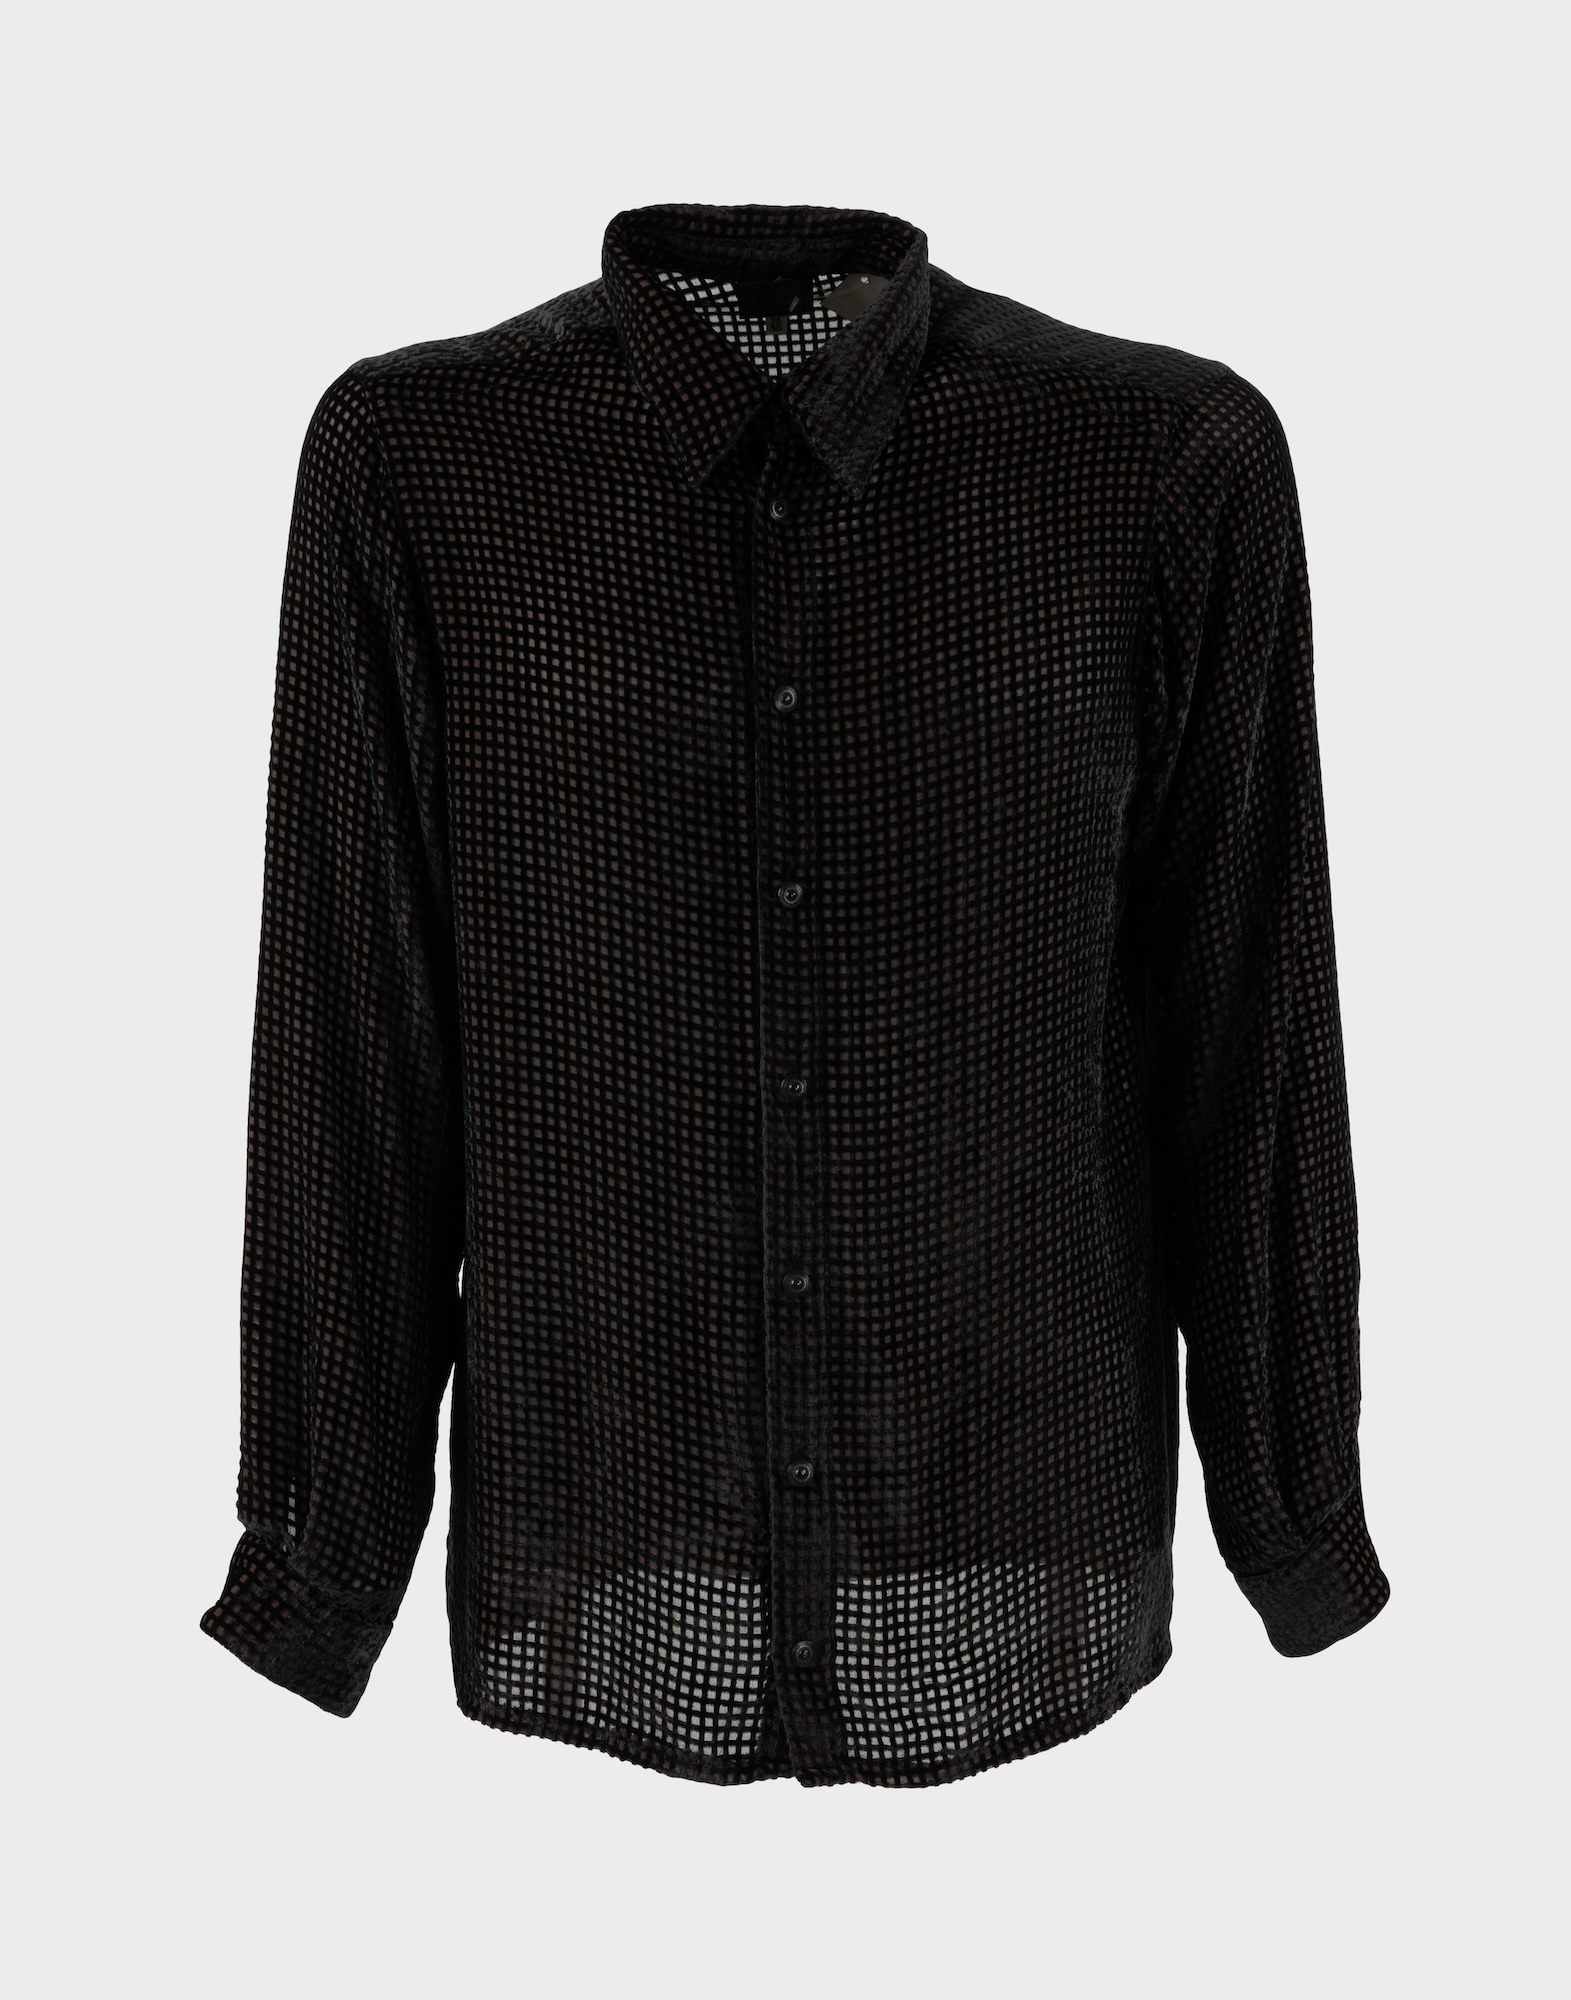 black men's long-sleeved shirt with transparent square pattern